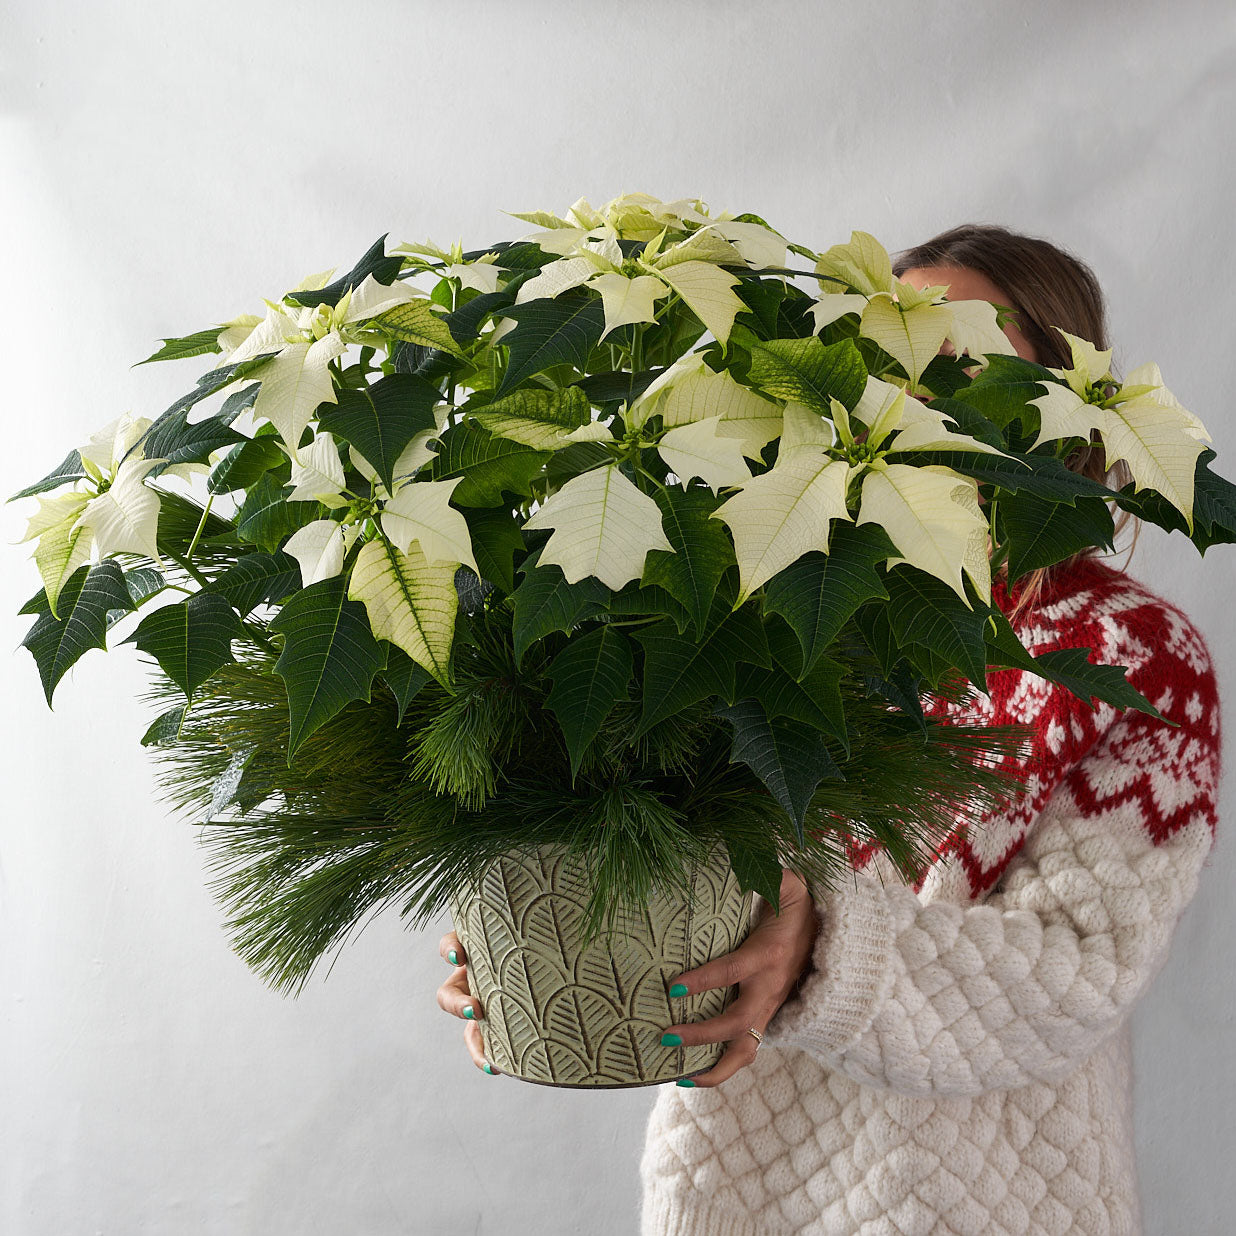 Woman in red and white sweater holding white poinsettia plant.